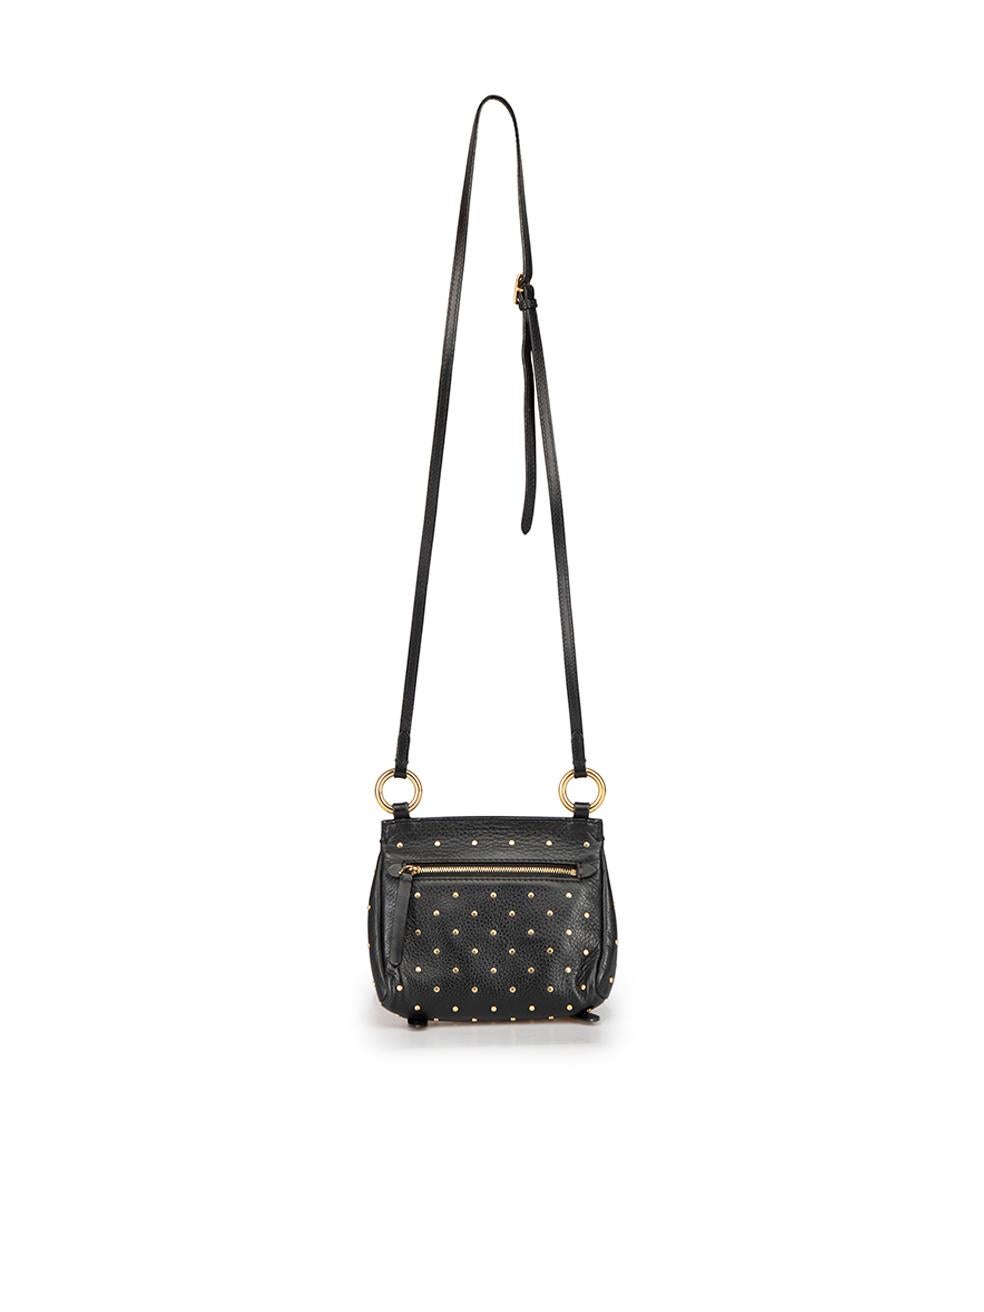 Burberry Black Leather Studded Crossbody In Excellent Condition In London, GB